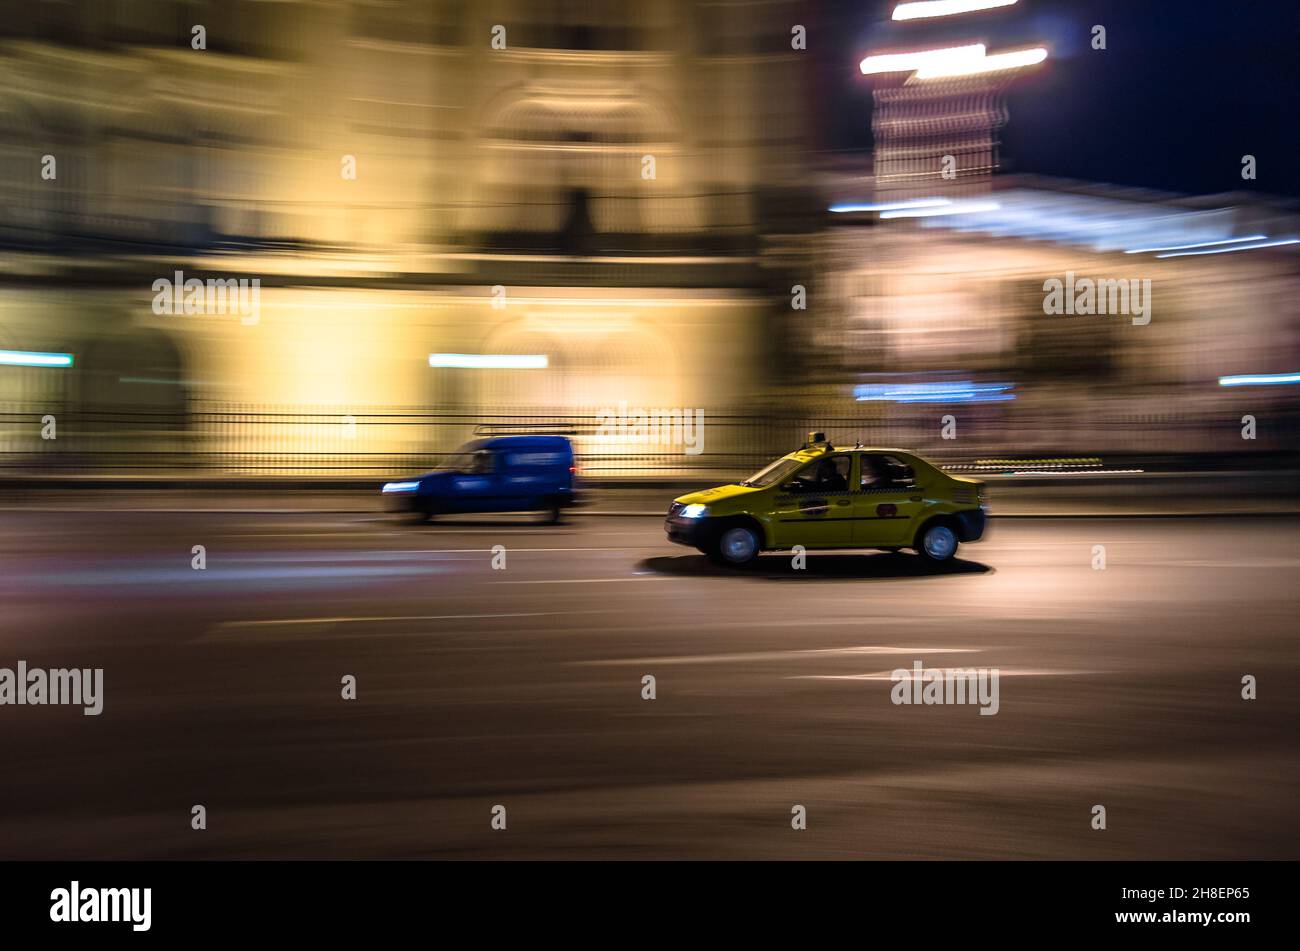 BUCHAREST, ROMANIA - NOVEMBER 17, 2013: Taxi in motion, at night in Bucharest, Romania, panning efect Stock Photo